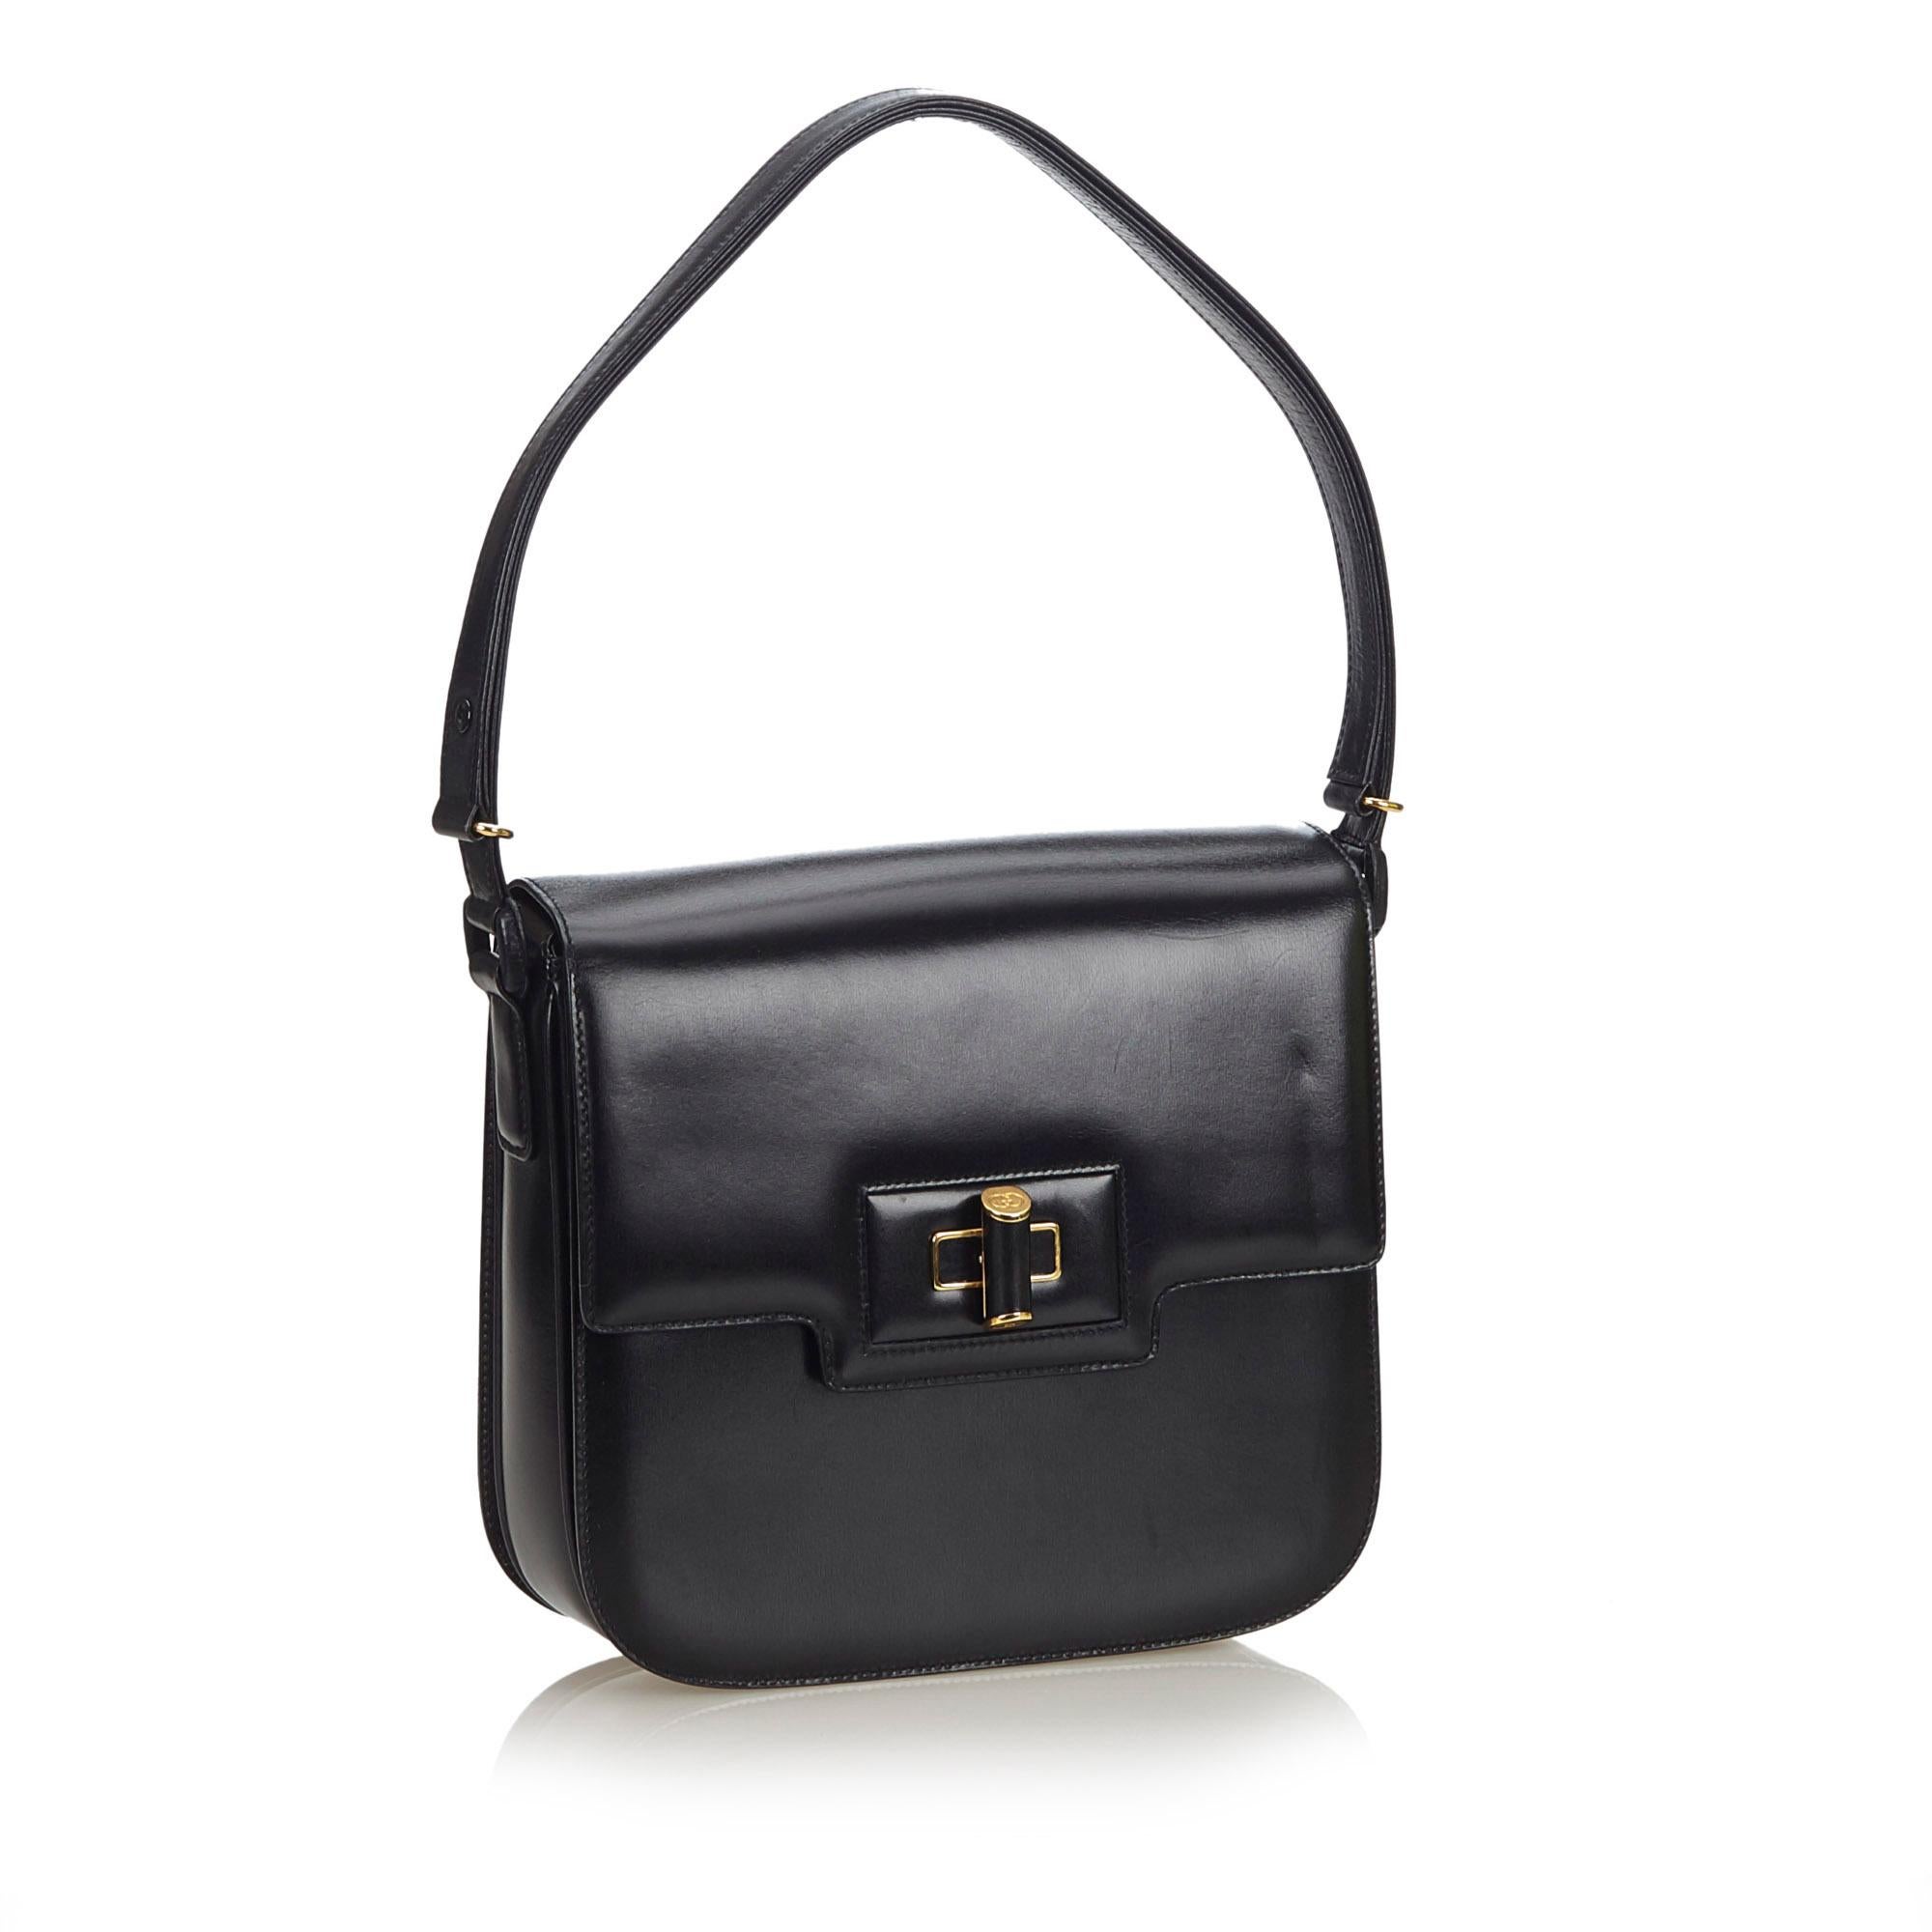 This shoulder bag features a leather body, a flat leather strap, a front flap with a twist lock closure, and interior zip and slip pockets. It carries as B+ condition rating.

Inclusions: 
Dust Bag
Dimensions:
Length: 21.00 cm
Width: 22.00 cm
Depth: